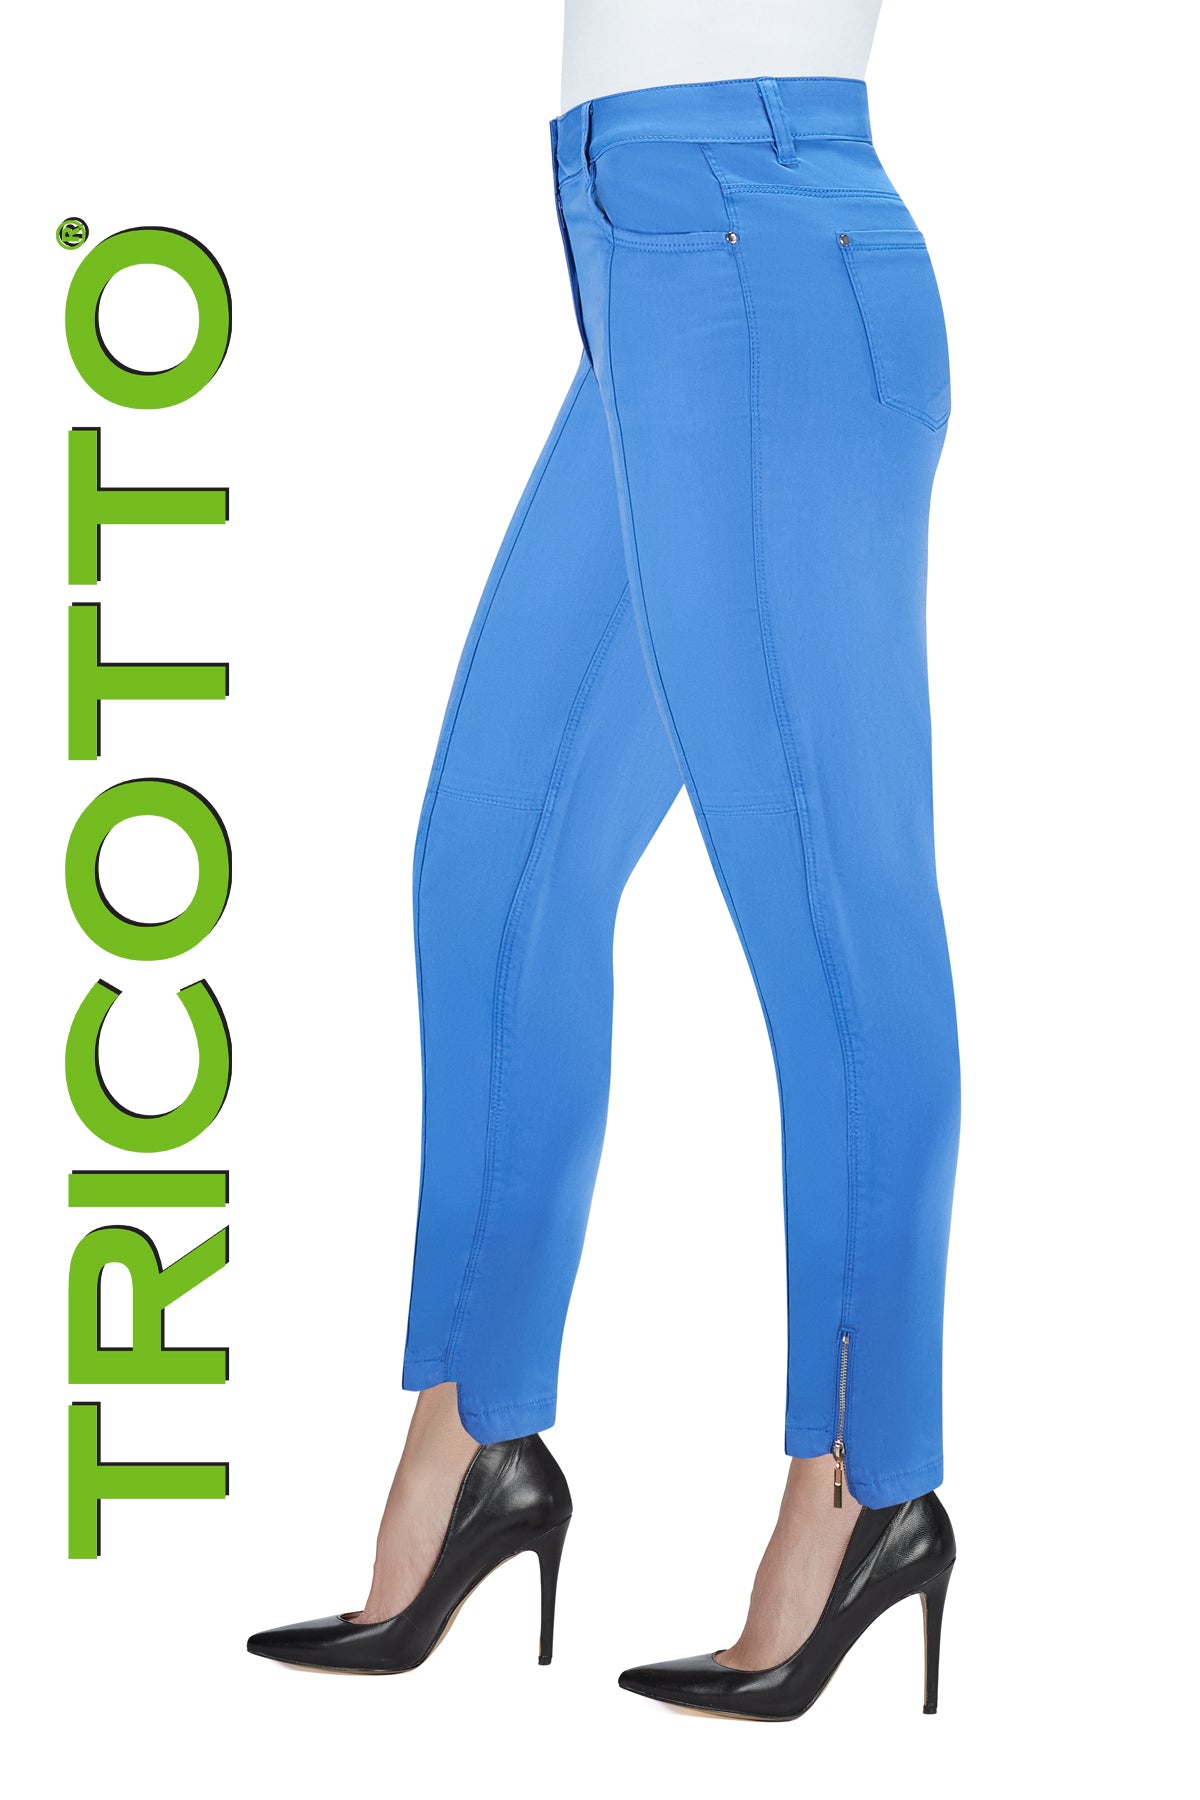 Tricotto Blue 5 pocket Pant with zipper hem detail , fly front and belt loops